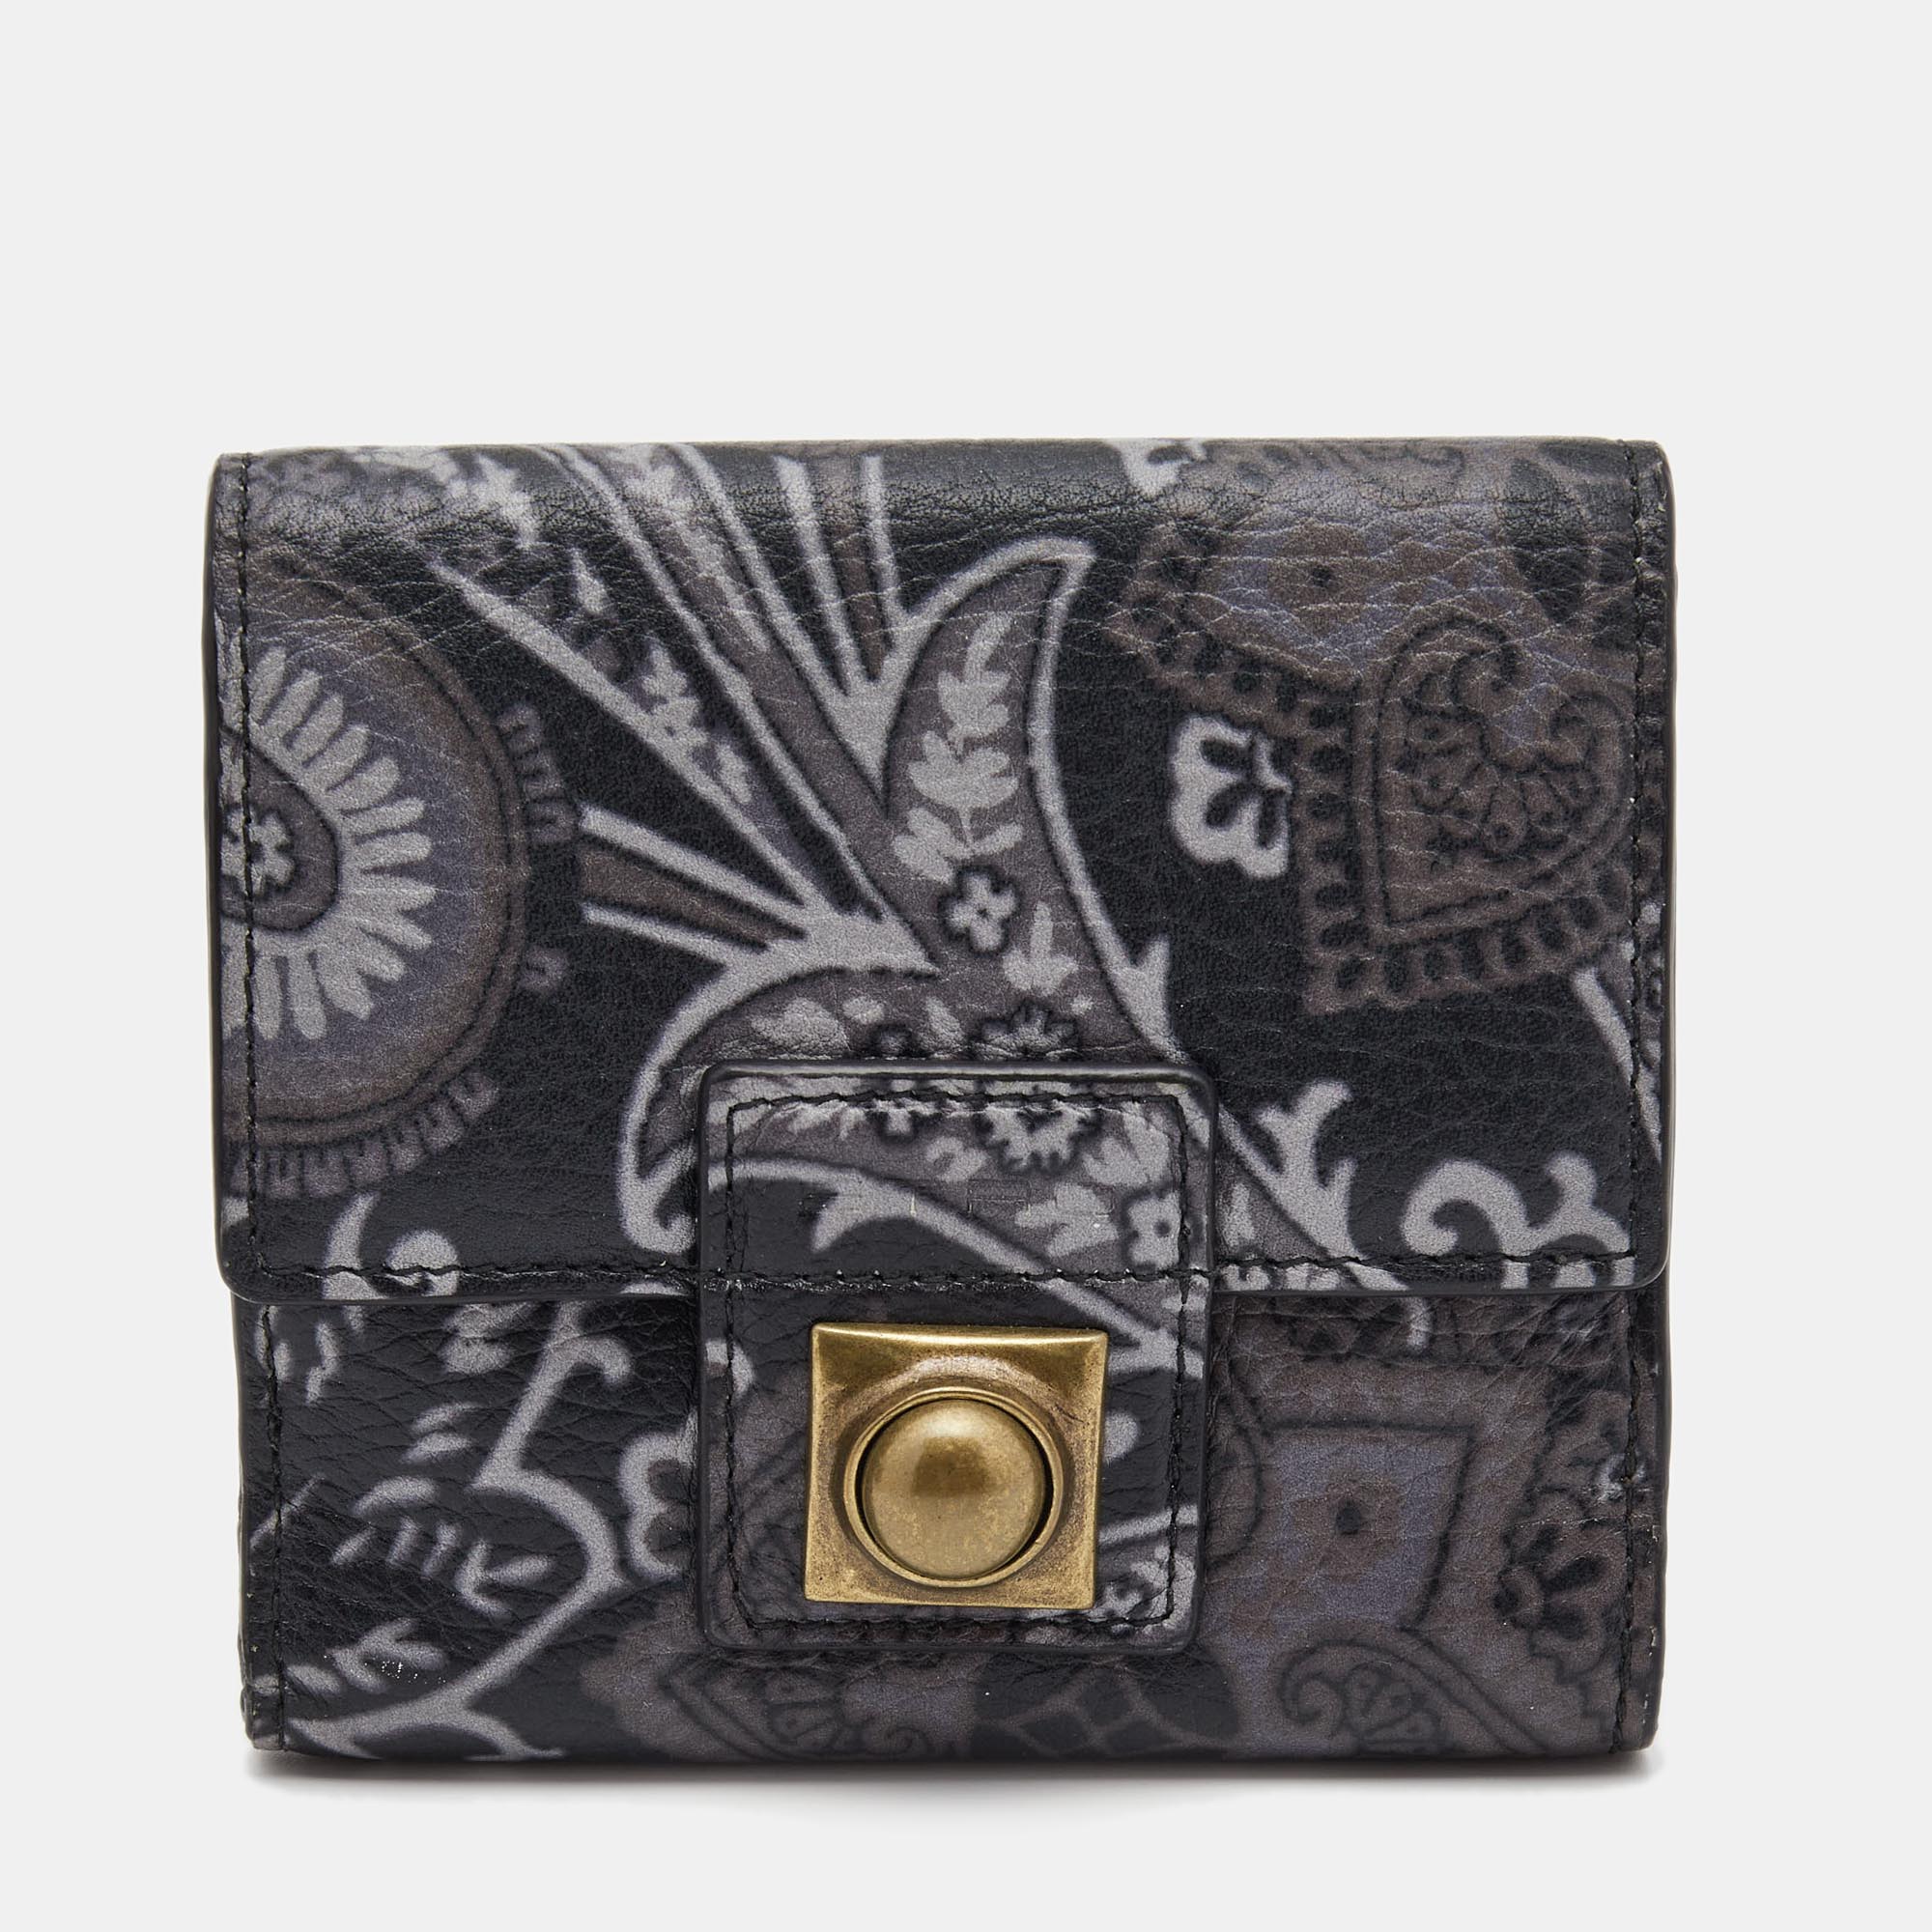 Pre-owned Etro Black/grey Paisley Print Leather Crown Me Compact Wallet